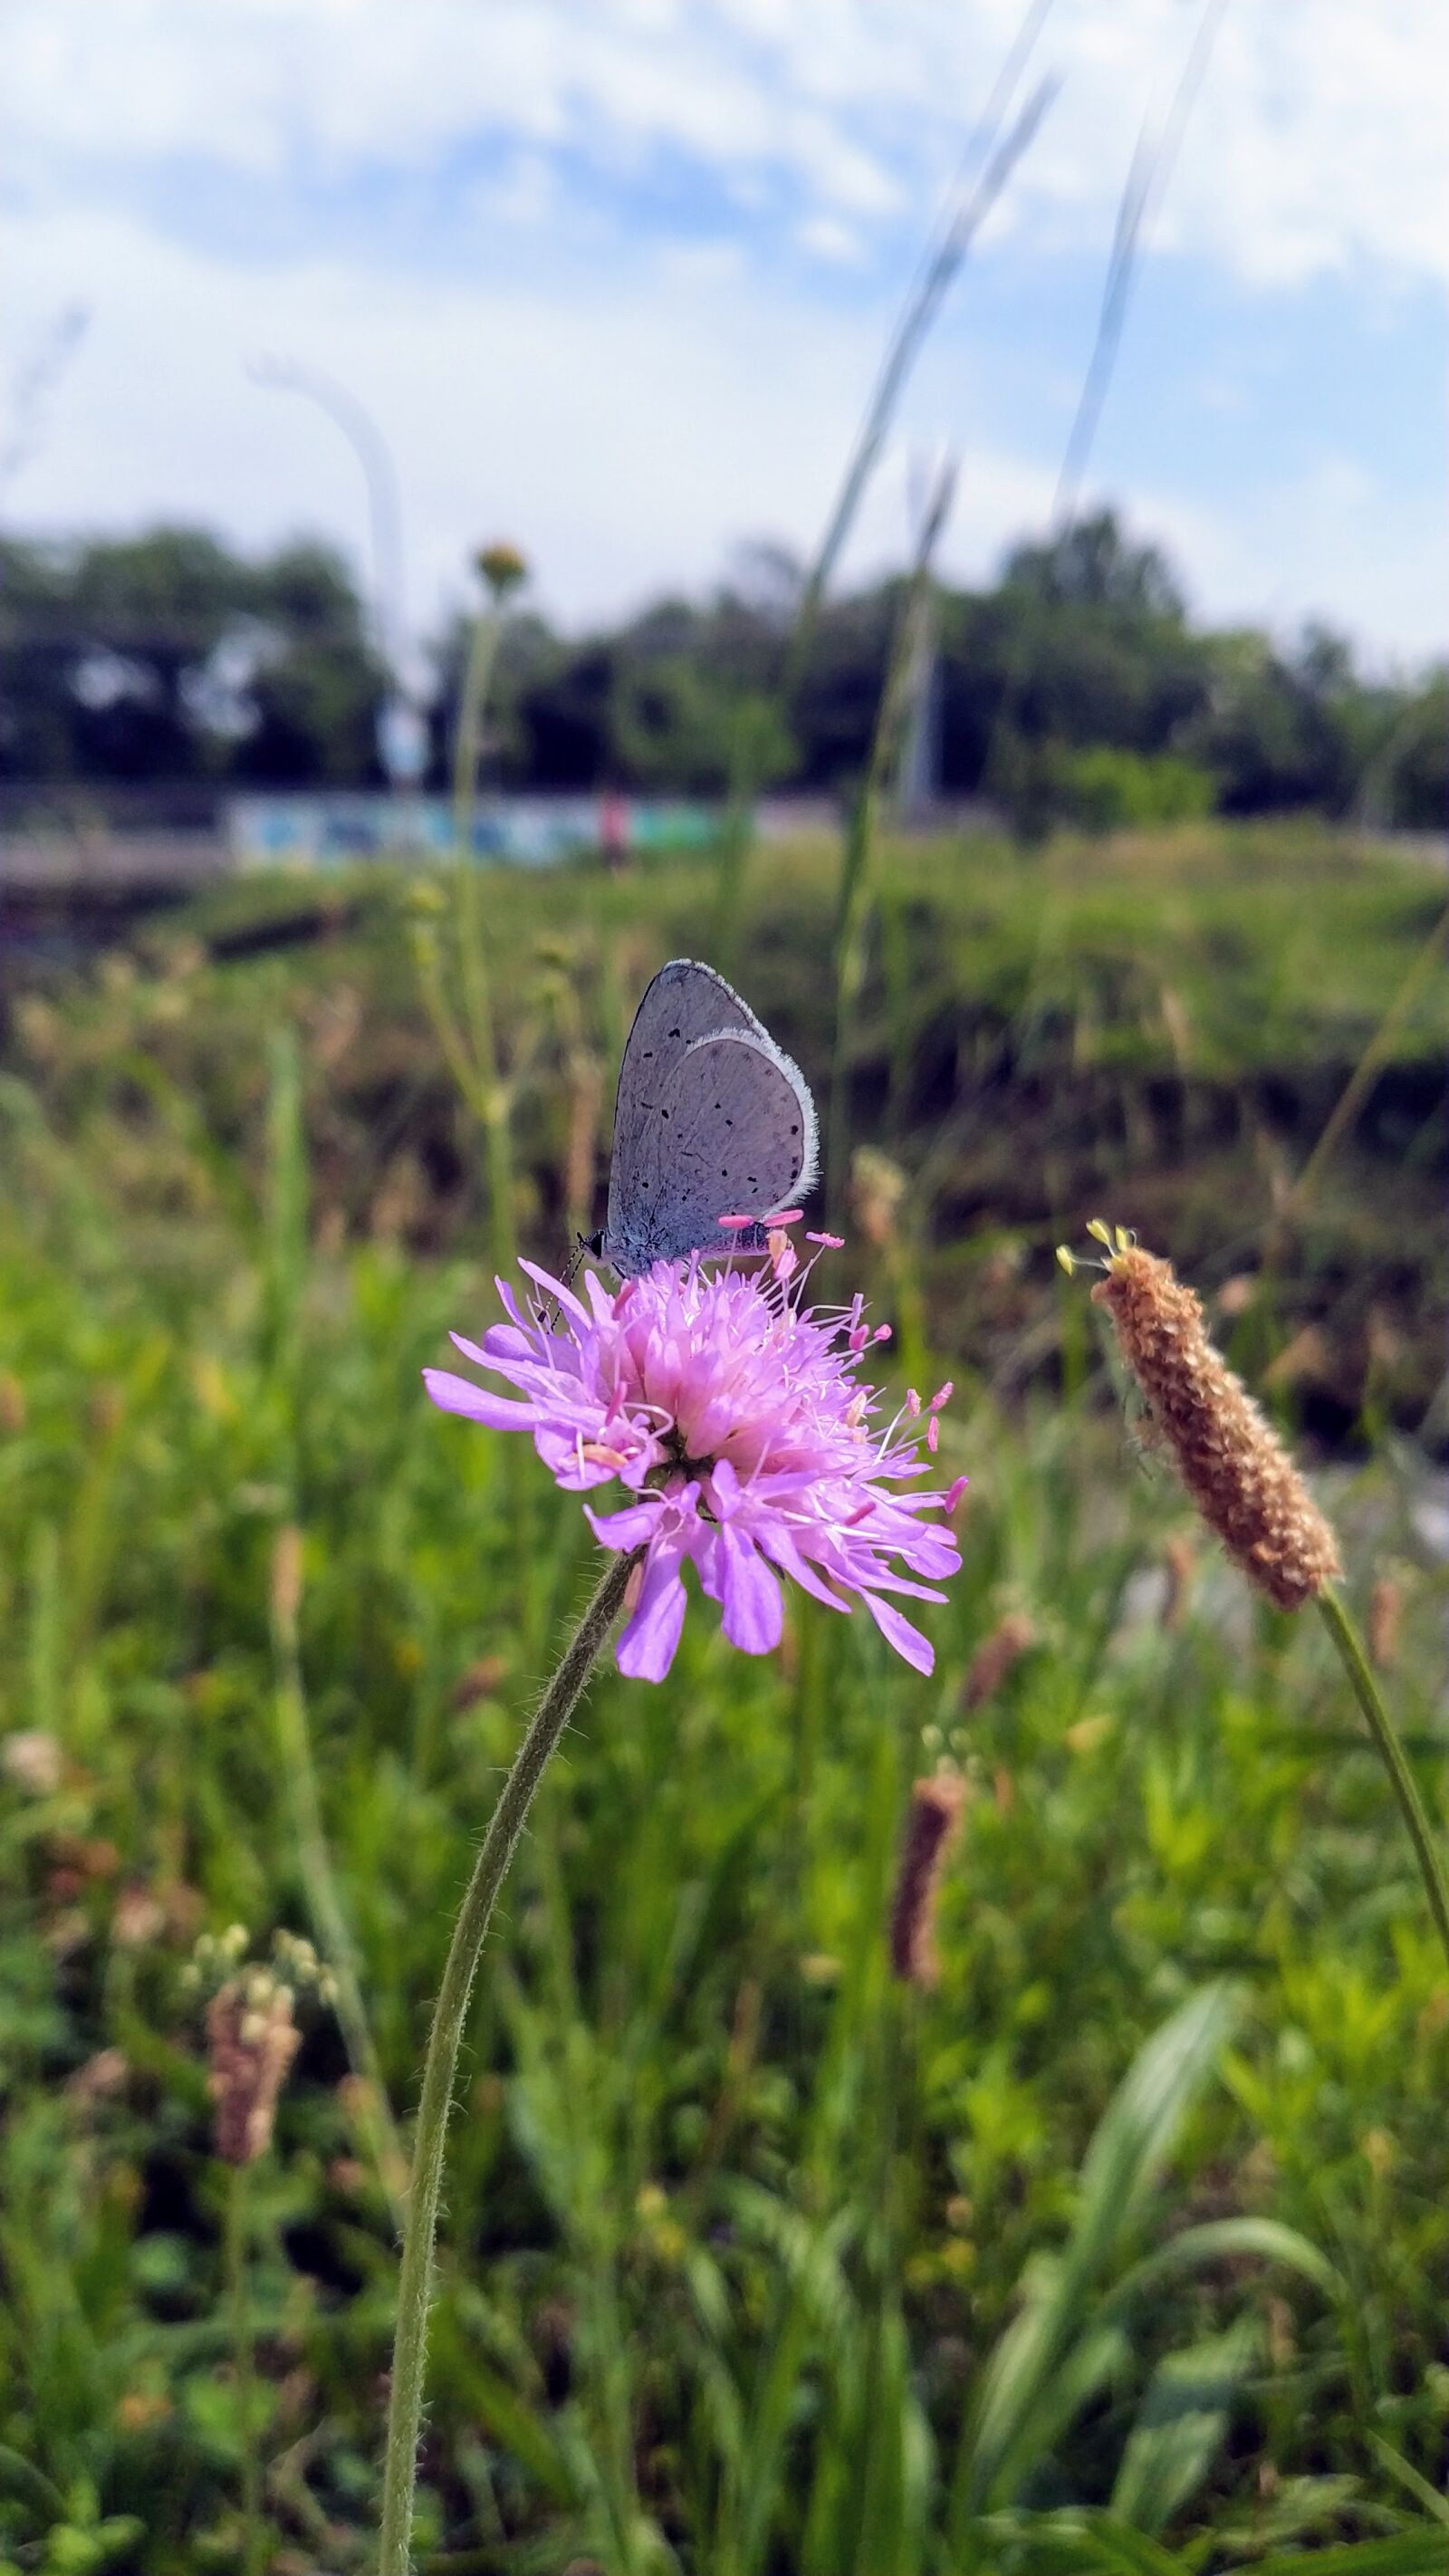 Xiaomi Mi MIX 2 sample photo. Flower, butterfly, nature photography